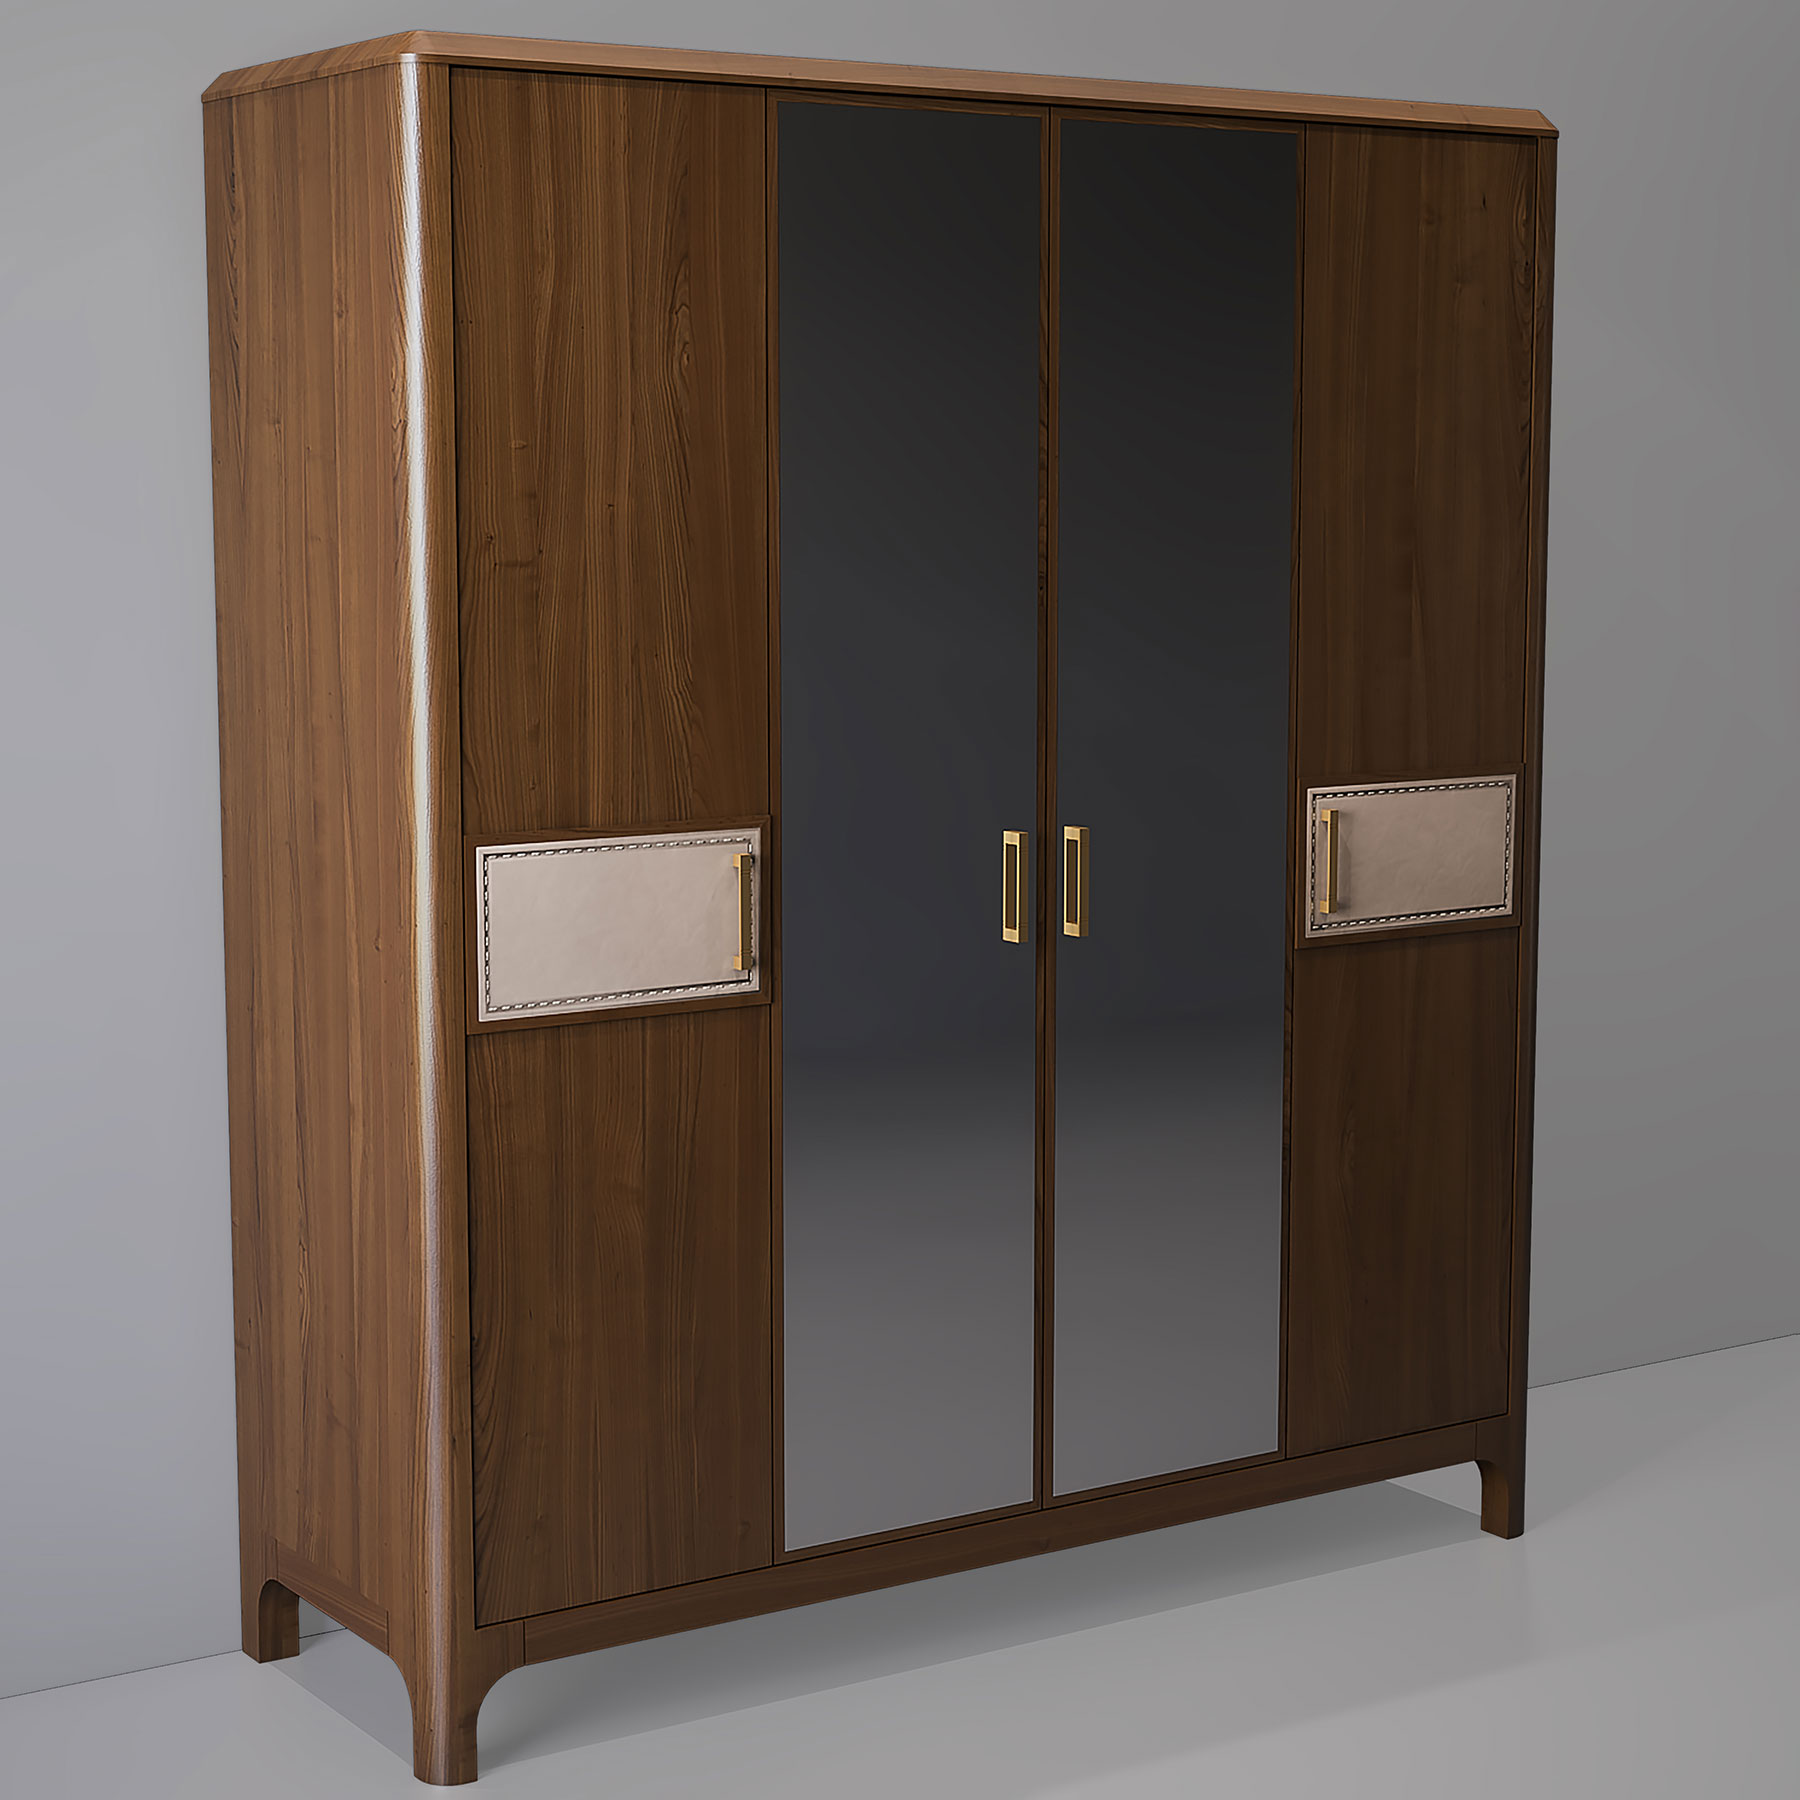 A four-door wardrobe from the Audrey collection